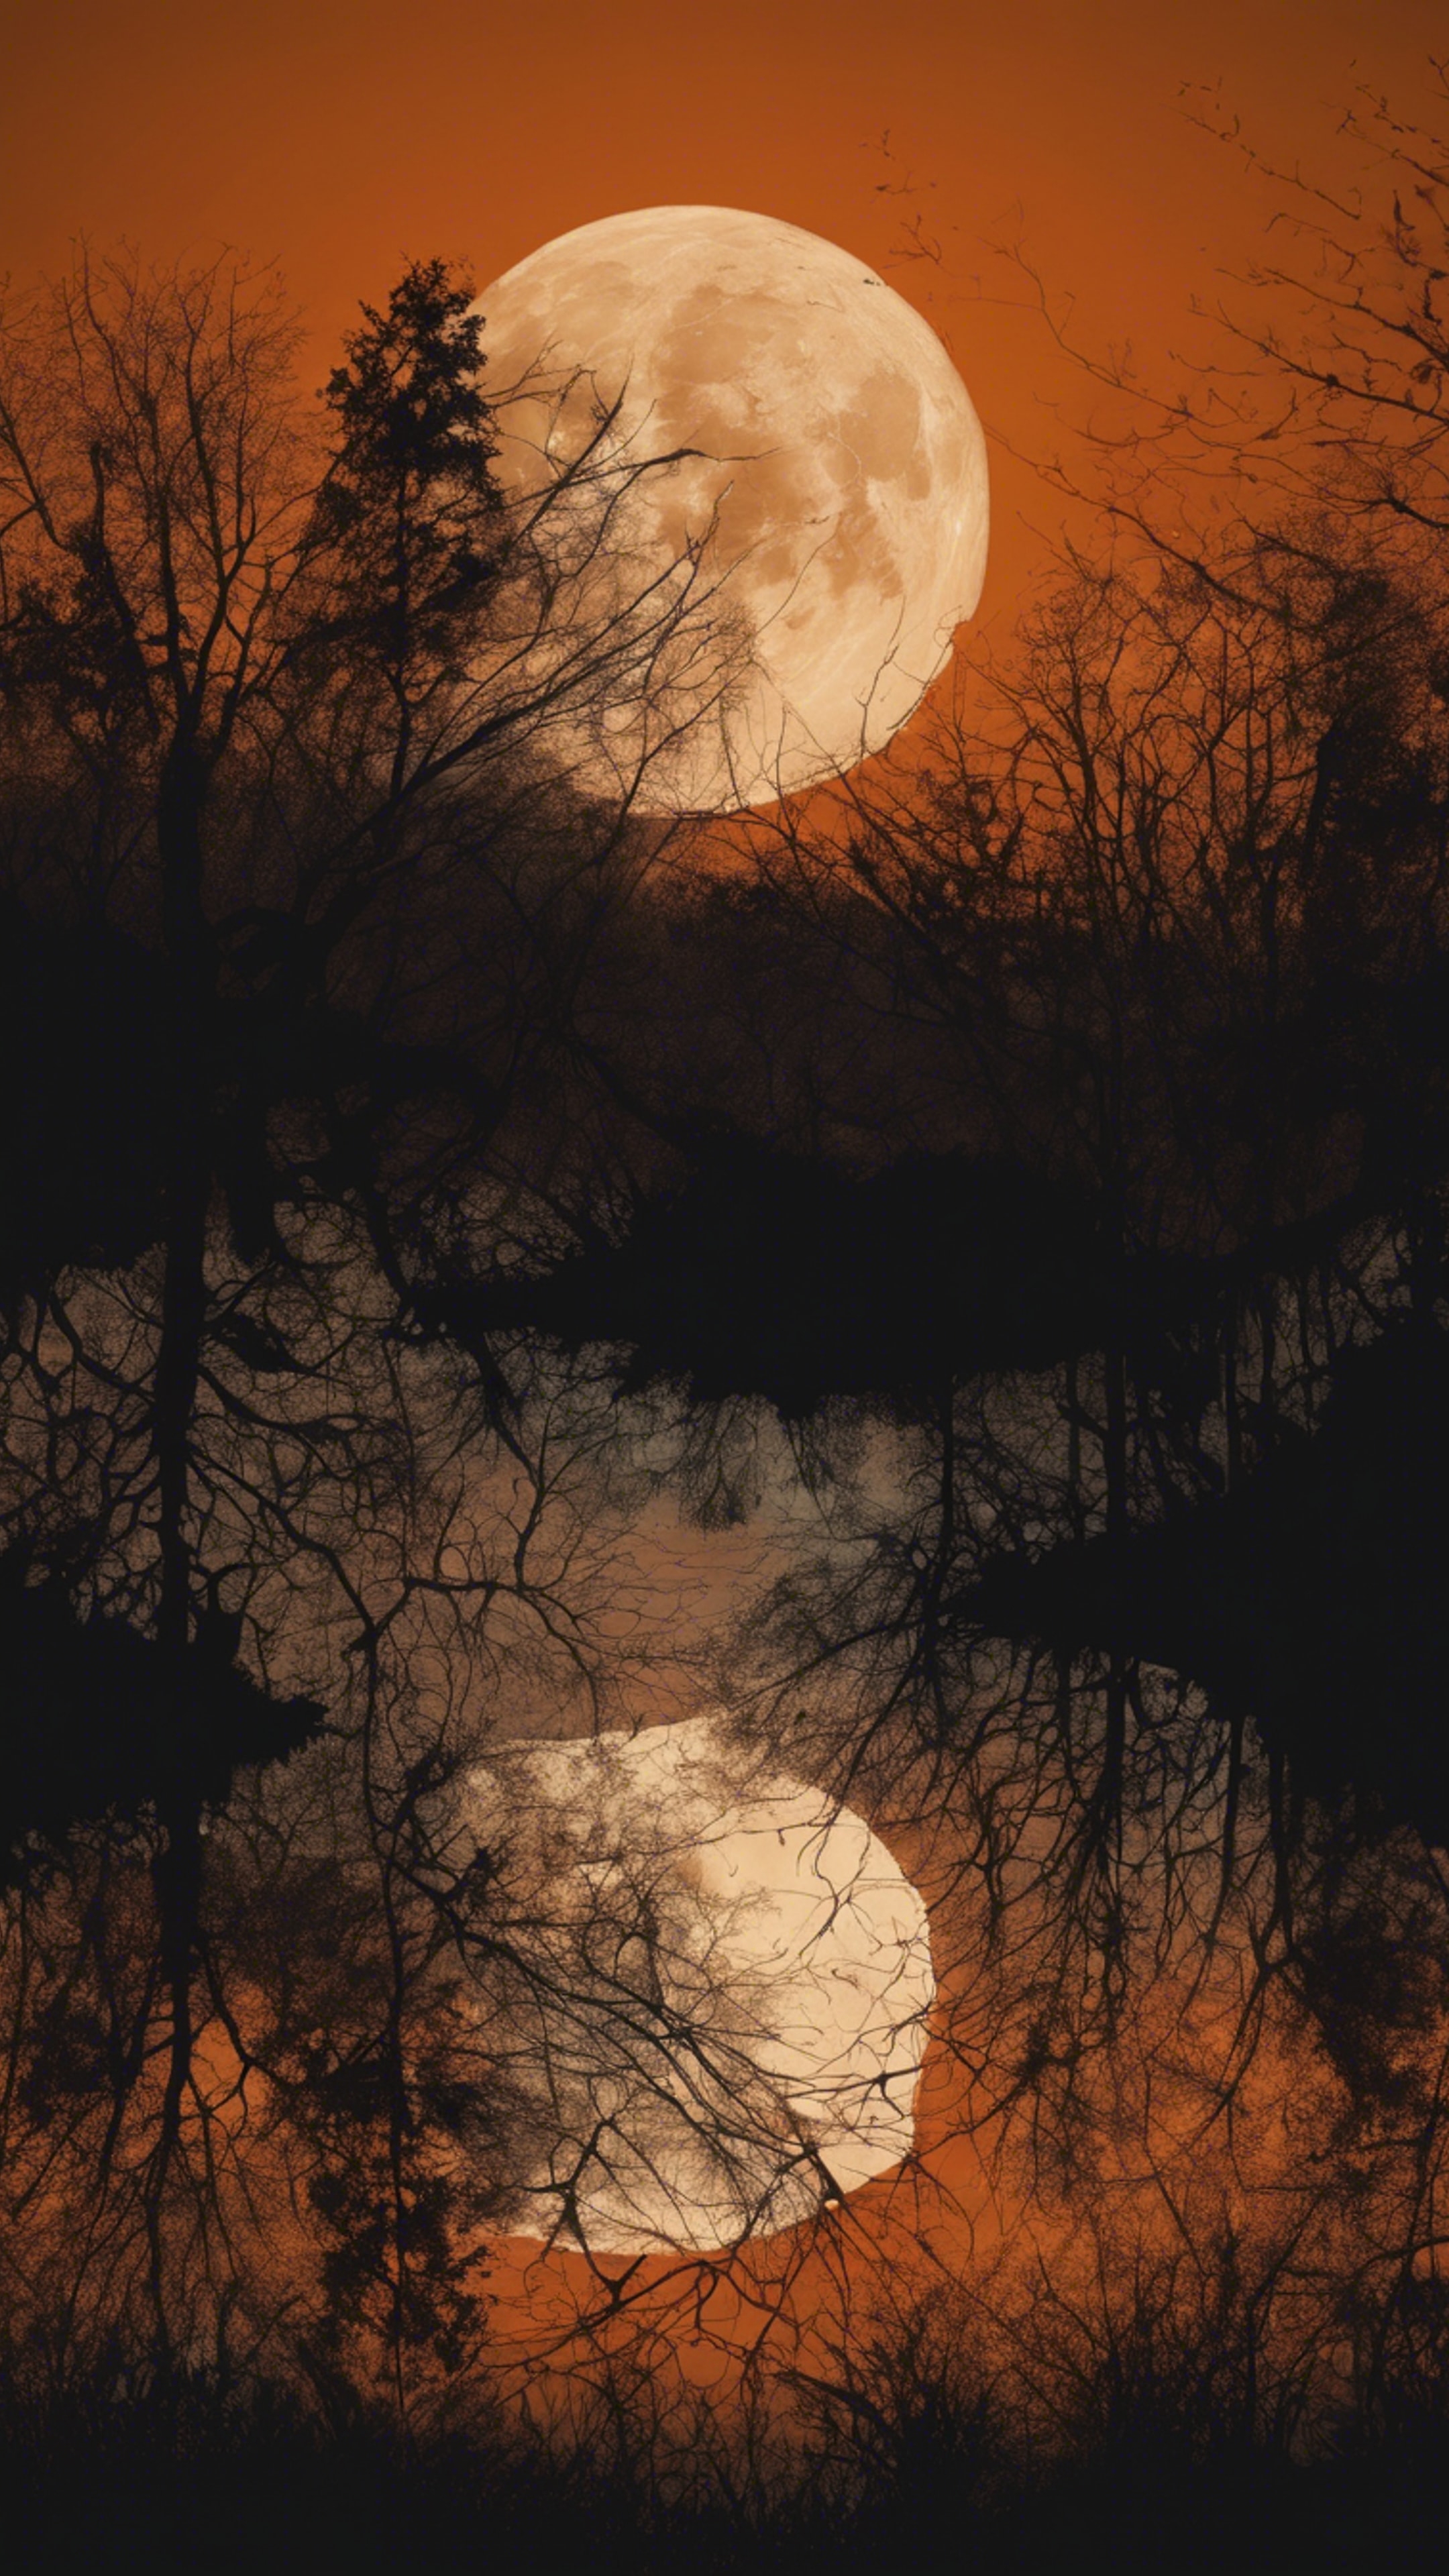 Gleaming full moon over black silhouetted forest contrasted by a deep orange sky. 벽지[d3ef8041818348d2b22b]